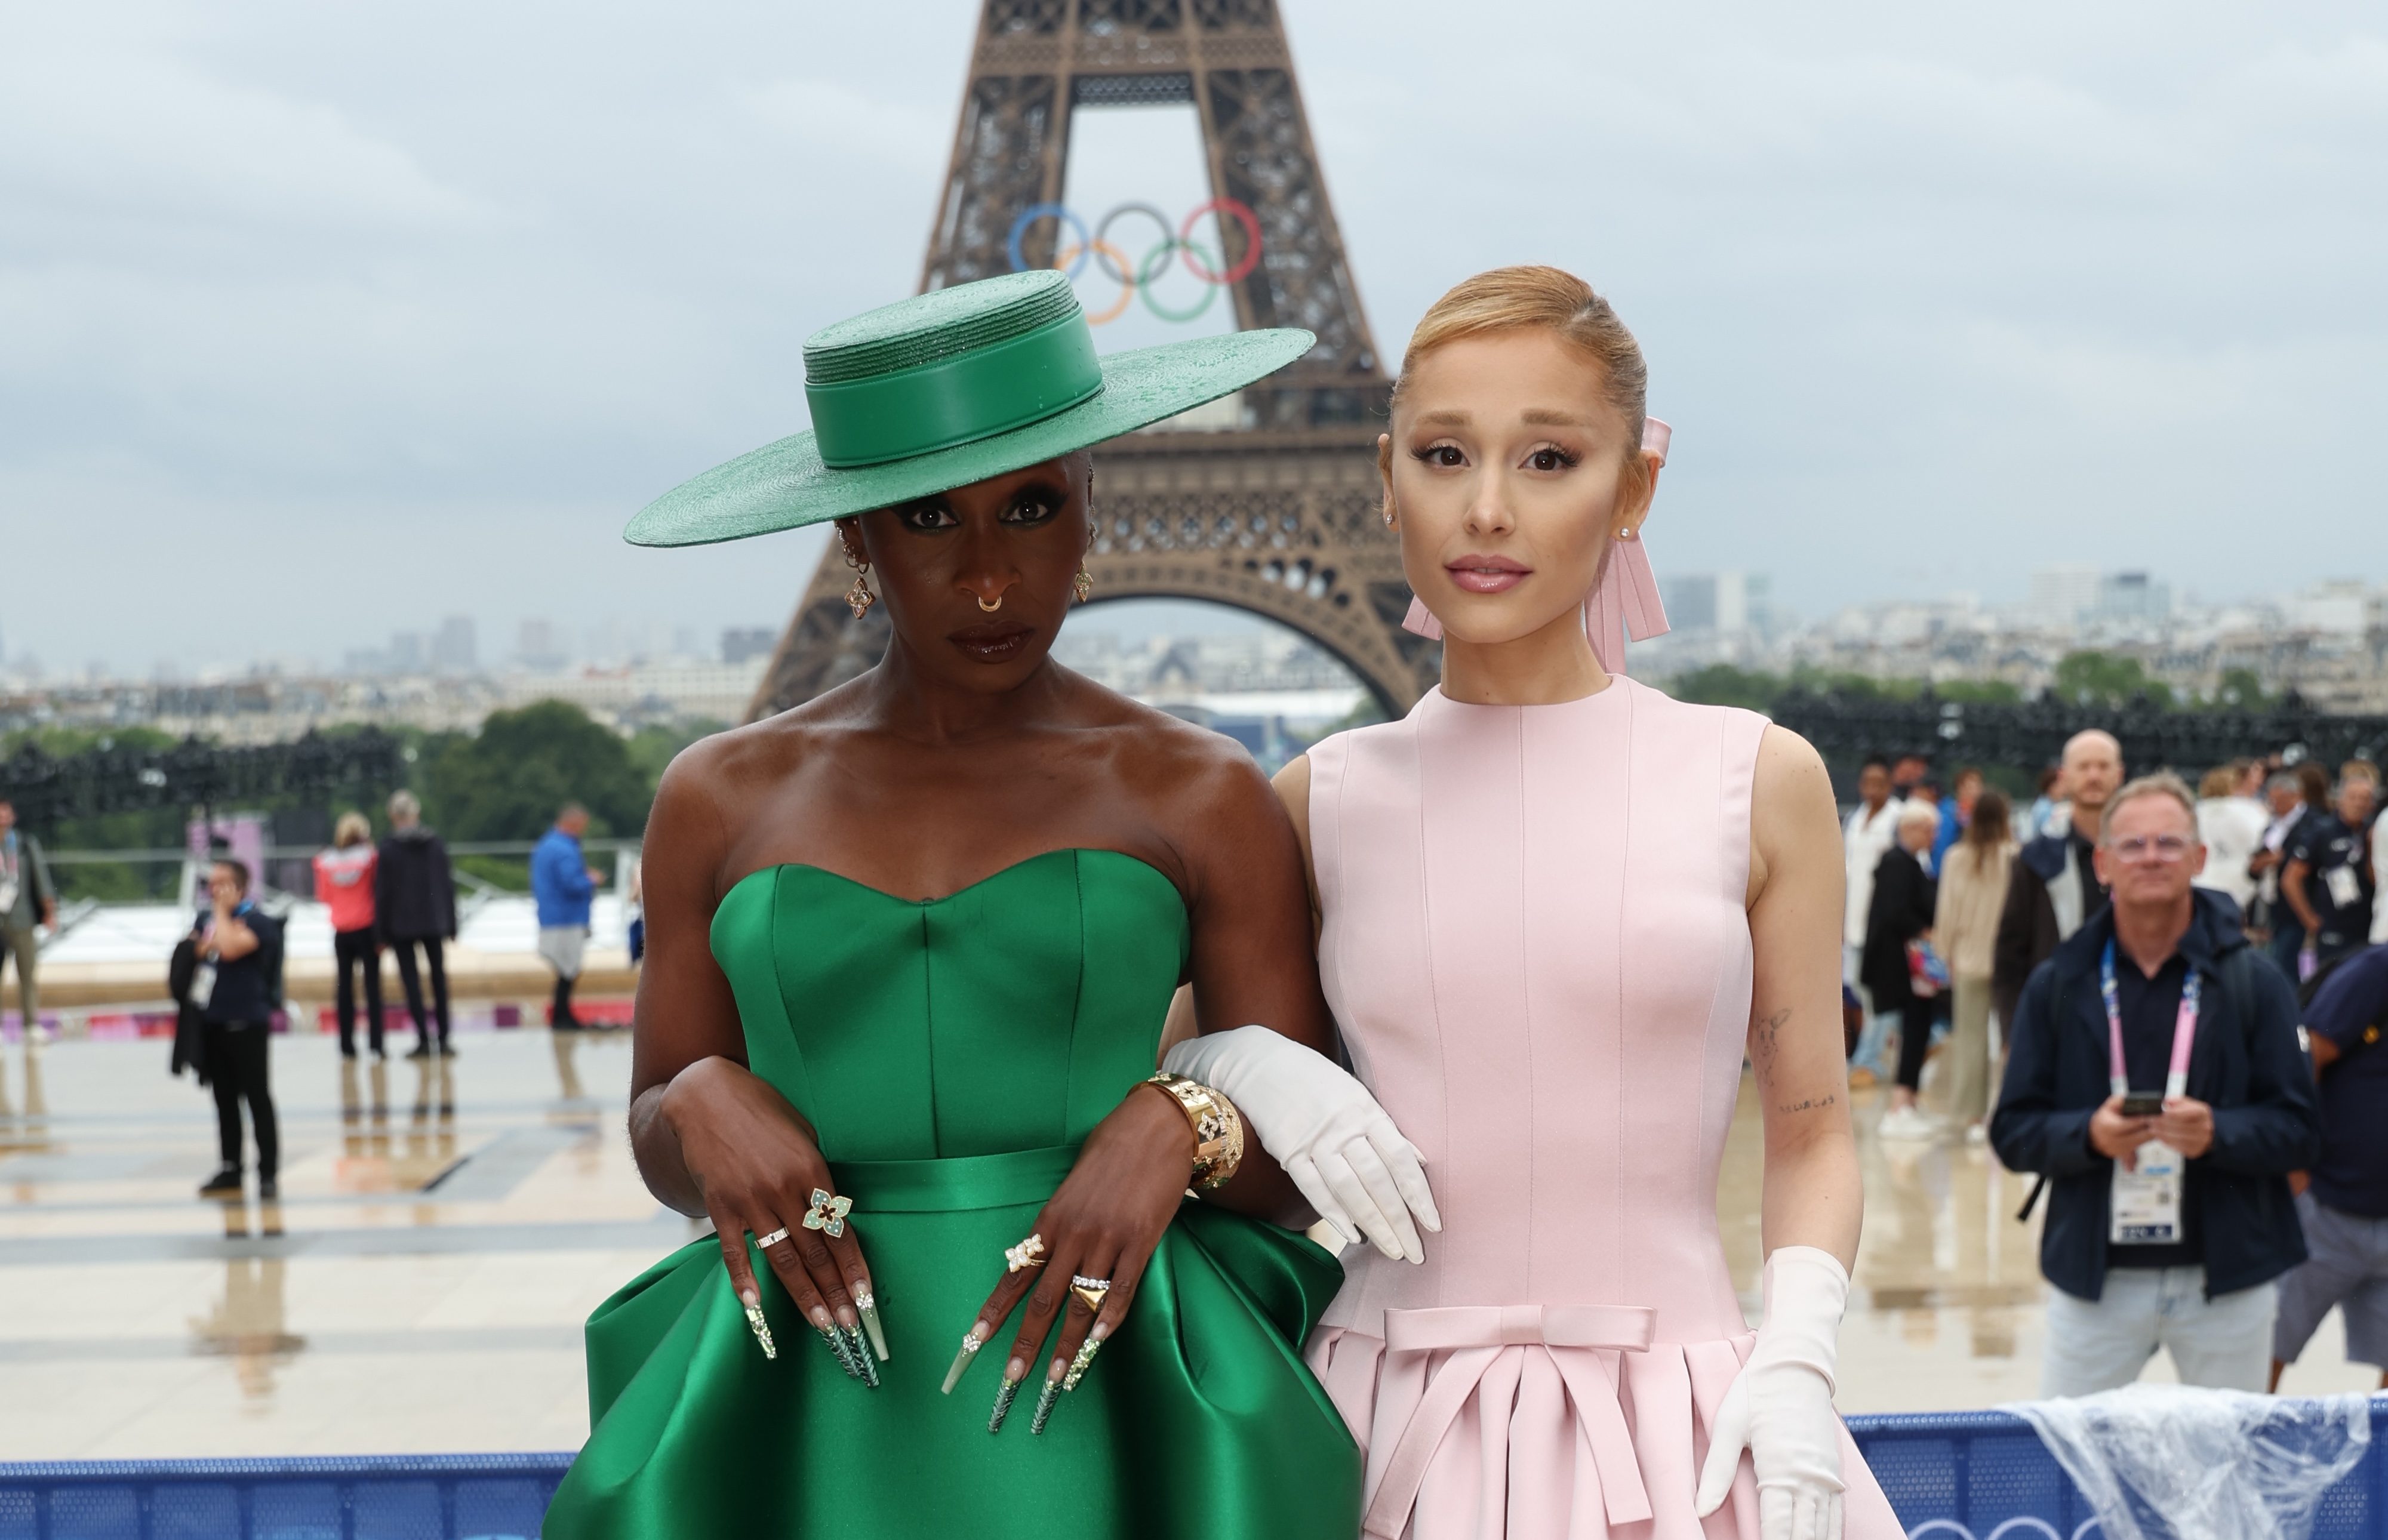 Ariana Grande & Cynthia Erivo Defy Gravity at the Paris Olympics in ‘Wicked’-Inspired Outfits